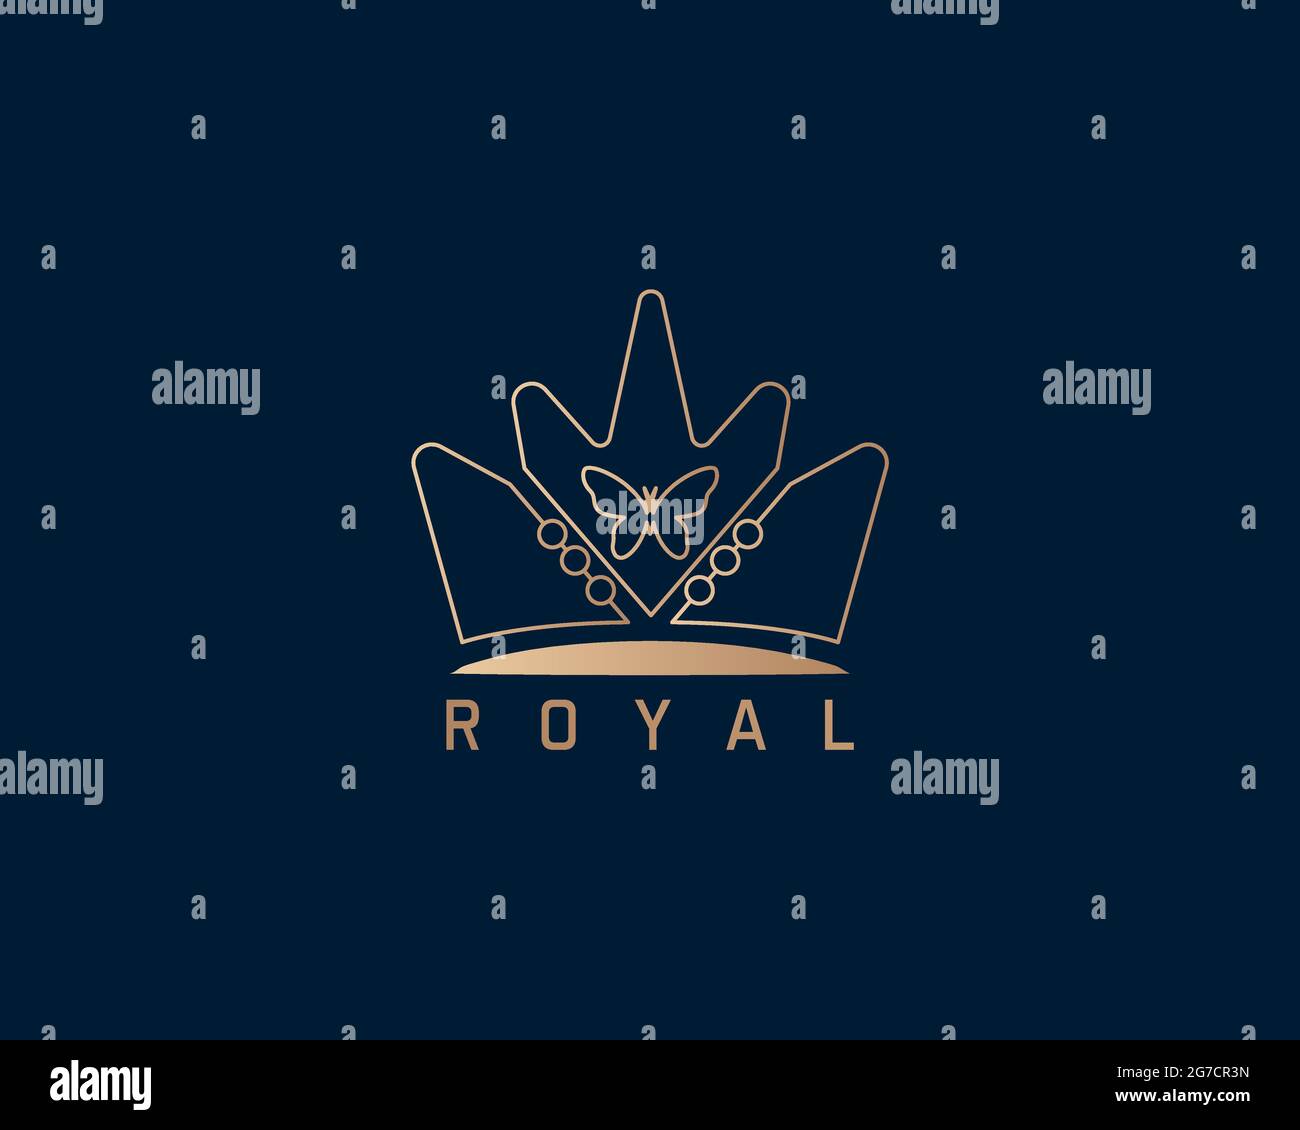 crown royal golden logo design can be used as sign, icon or symbol, full layered vector and easy to edit and customize size and color, compatible with Stock Vector